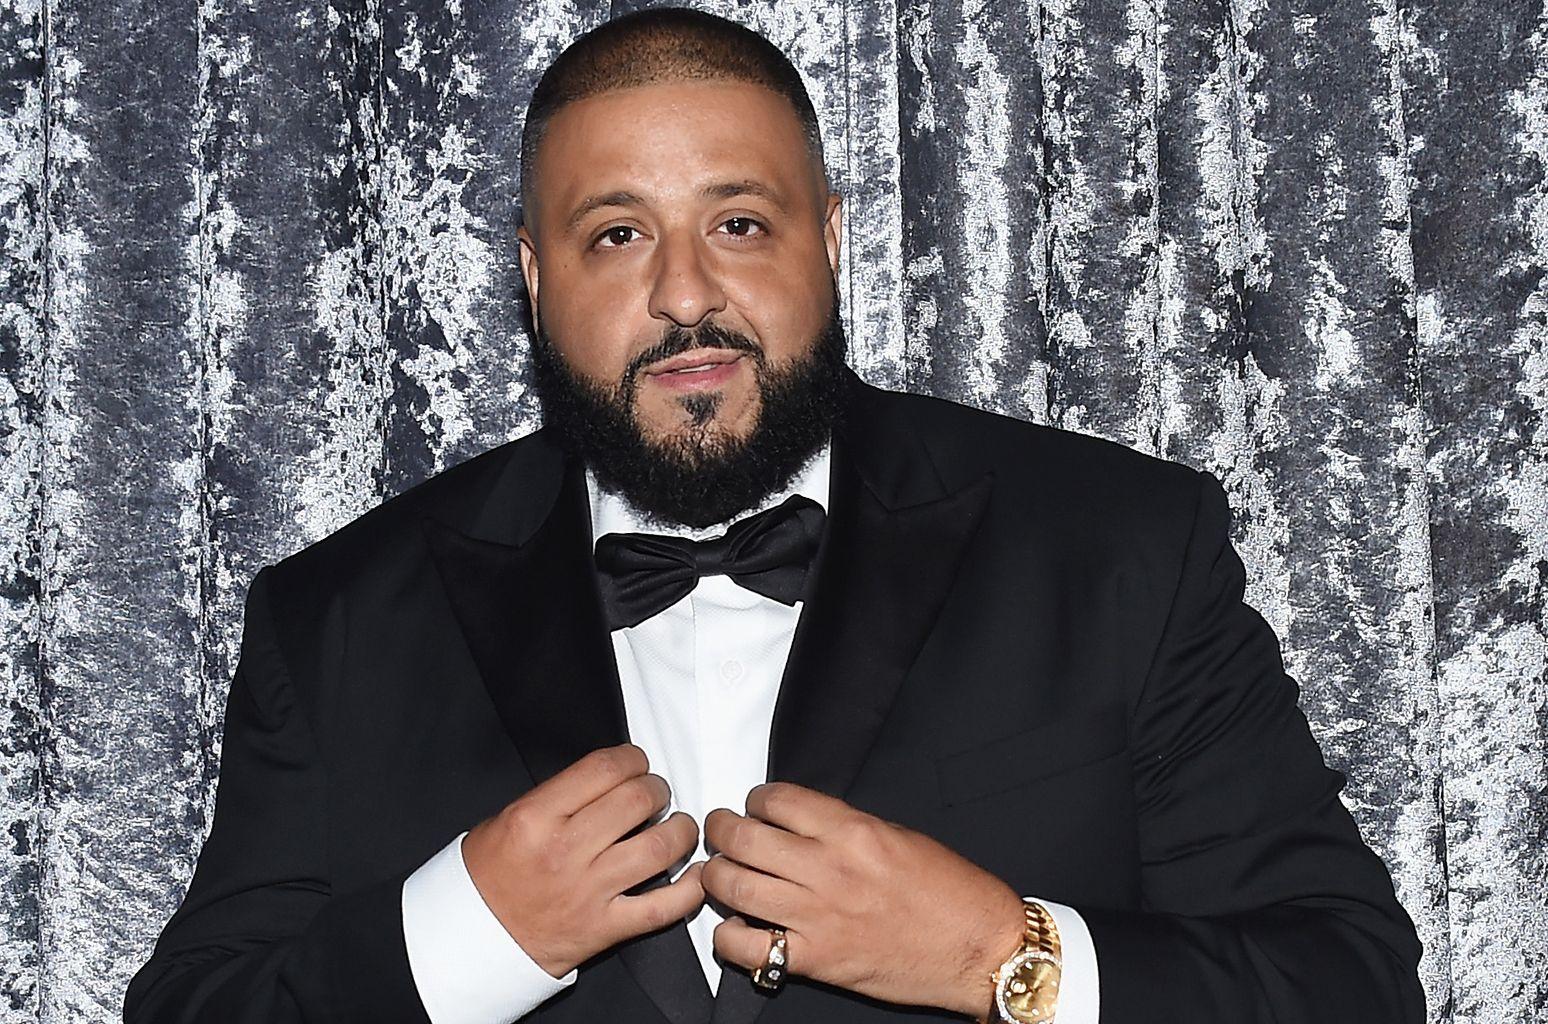 DJ Khaled's 'Grateful' Album: All the Features We Know So Far